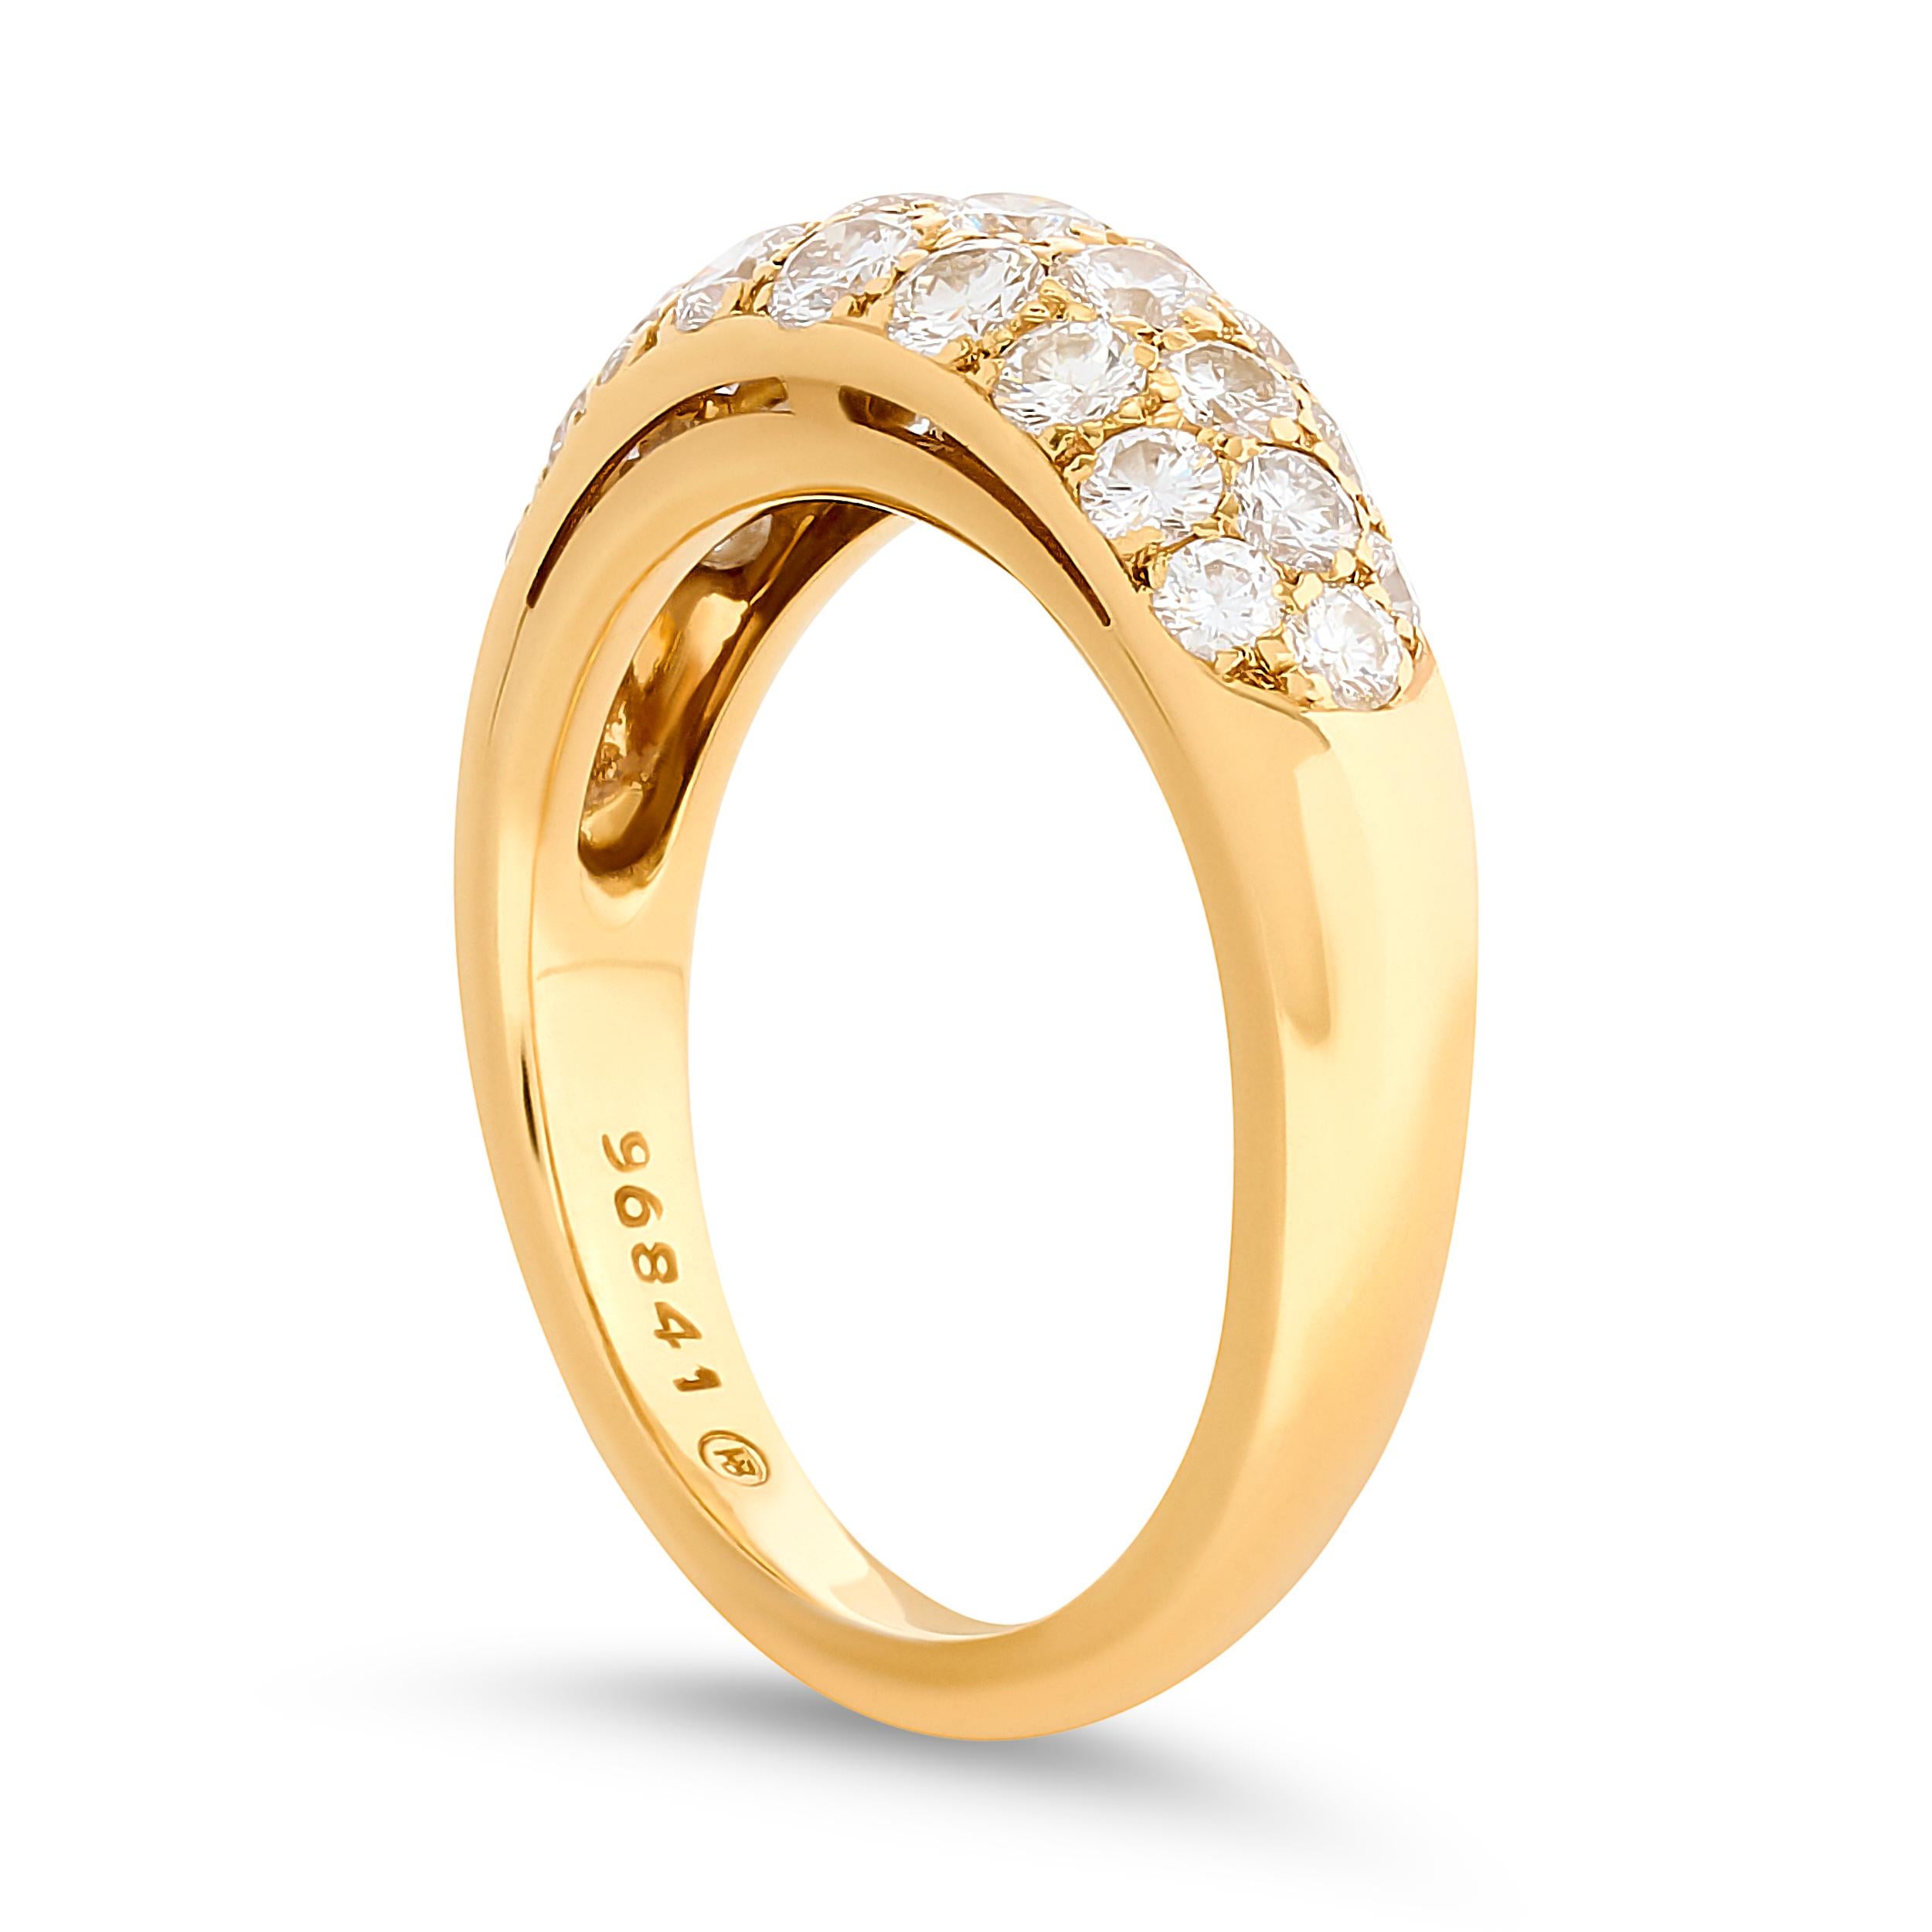 Sparkling brilliance that steals the spotlight!

This Oscar Heyman ring is made in 18-karat yellow gold. The ring contains 28 round diamonds totaling approximately 1.00 carat; G-H color and VS clarity.

Stamped 